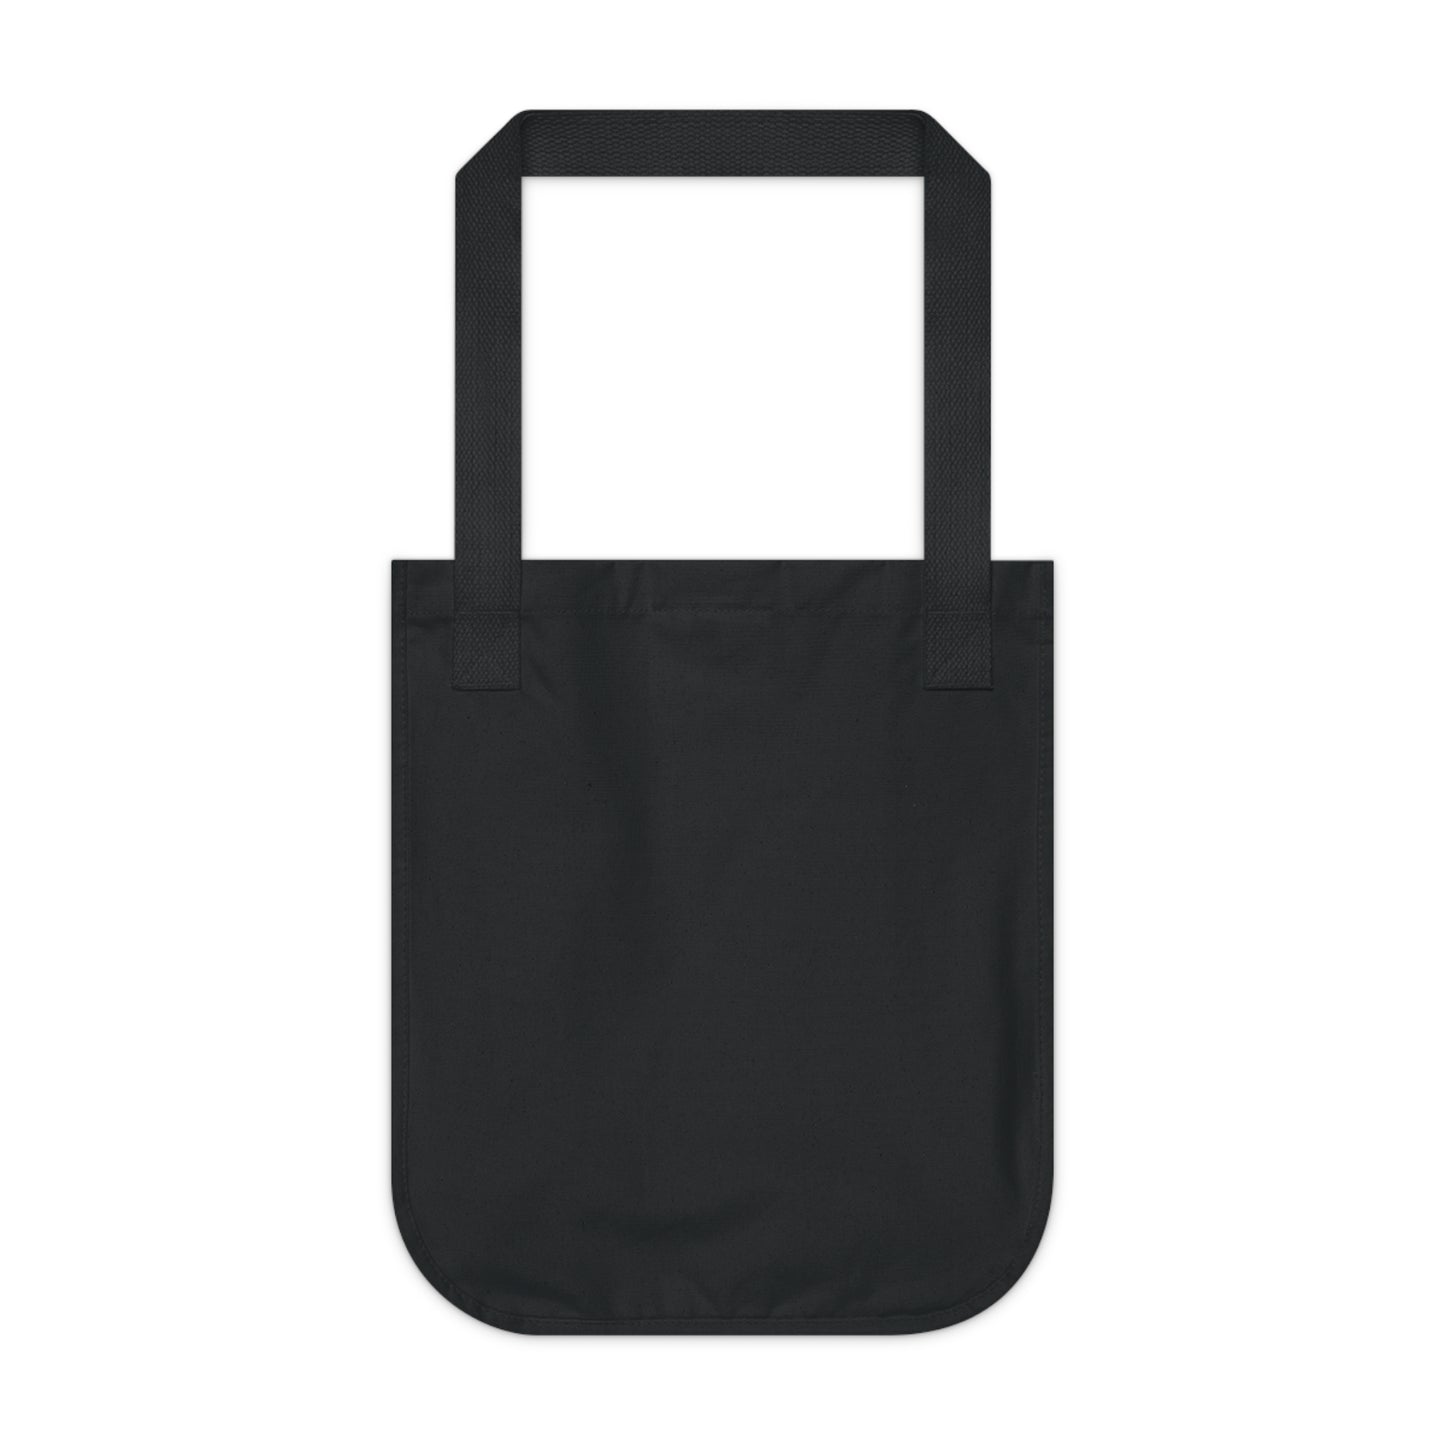 "A Beacon of Hope" - The Alien Eco-friendly Tote Bag